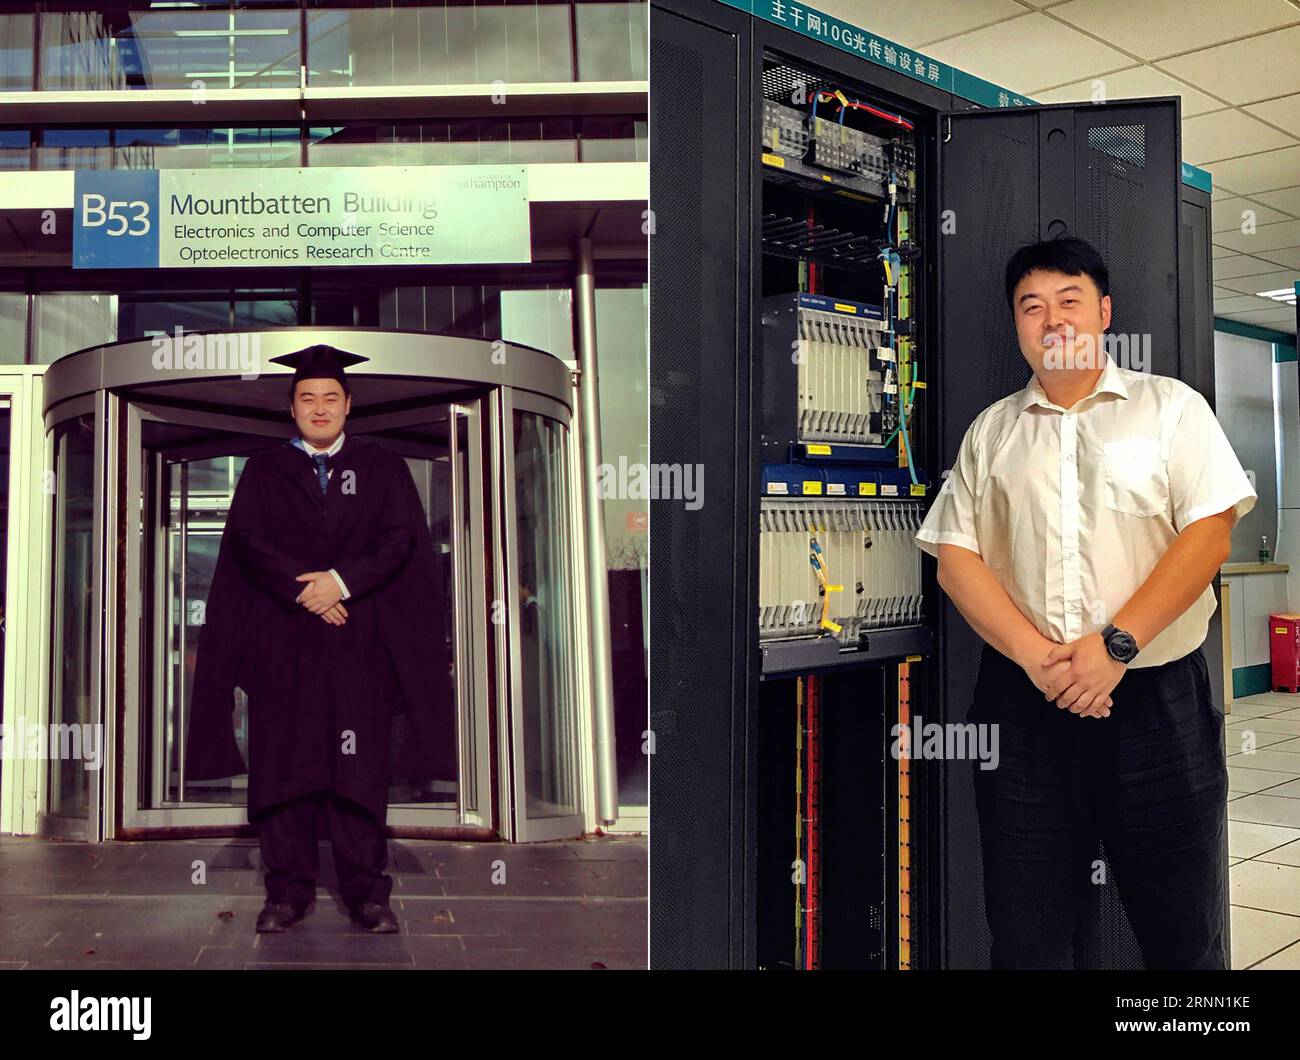 (170620) -- TAIYUAN, June 20, 2017 -- Combo photo shows the graduation picture of Lin Yipeng in 2013 (L) and Lin posing at the training center of a company in Taiyuan, capital of north China s Shanxi Province, June 16, 2017. After graduation with a master degree from the University of Southampton in Britain in 2013, Lin worked as a professional trainer at a local company in Taiyuan. Many Chinese college graduates will leave campus and start their careers this summer. ) (ry) CHINA-TAIYUAN-COLLEGE GRADUATES-CAREER (CN) CaoxYang PUBLICATIONxNOTxINxCHN   Taiyuan June 20 2017 Combo Photo Shows The Stock Photo